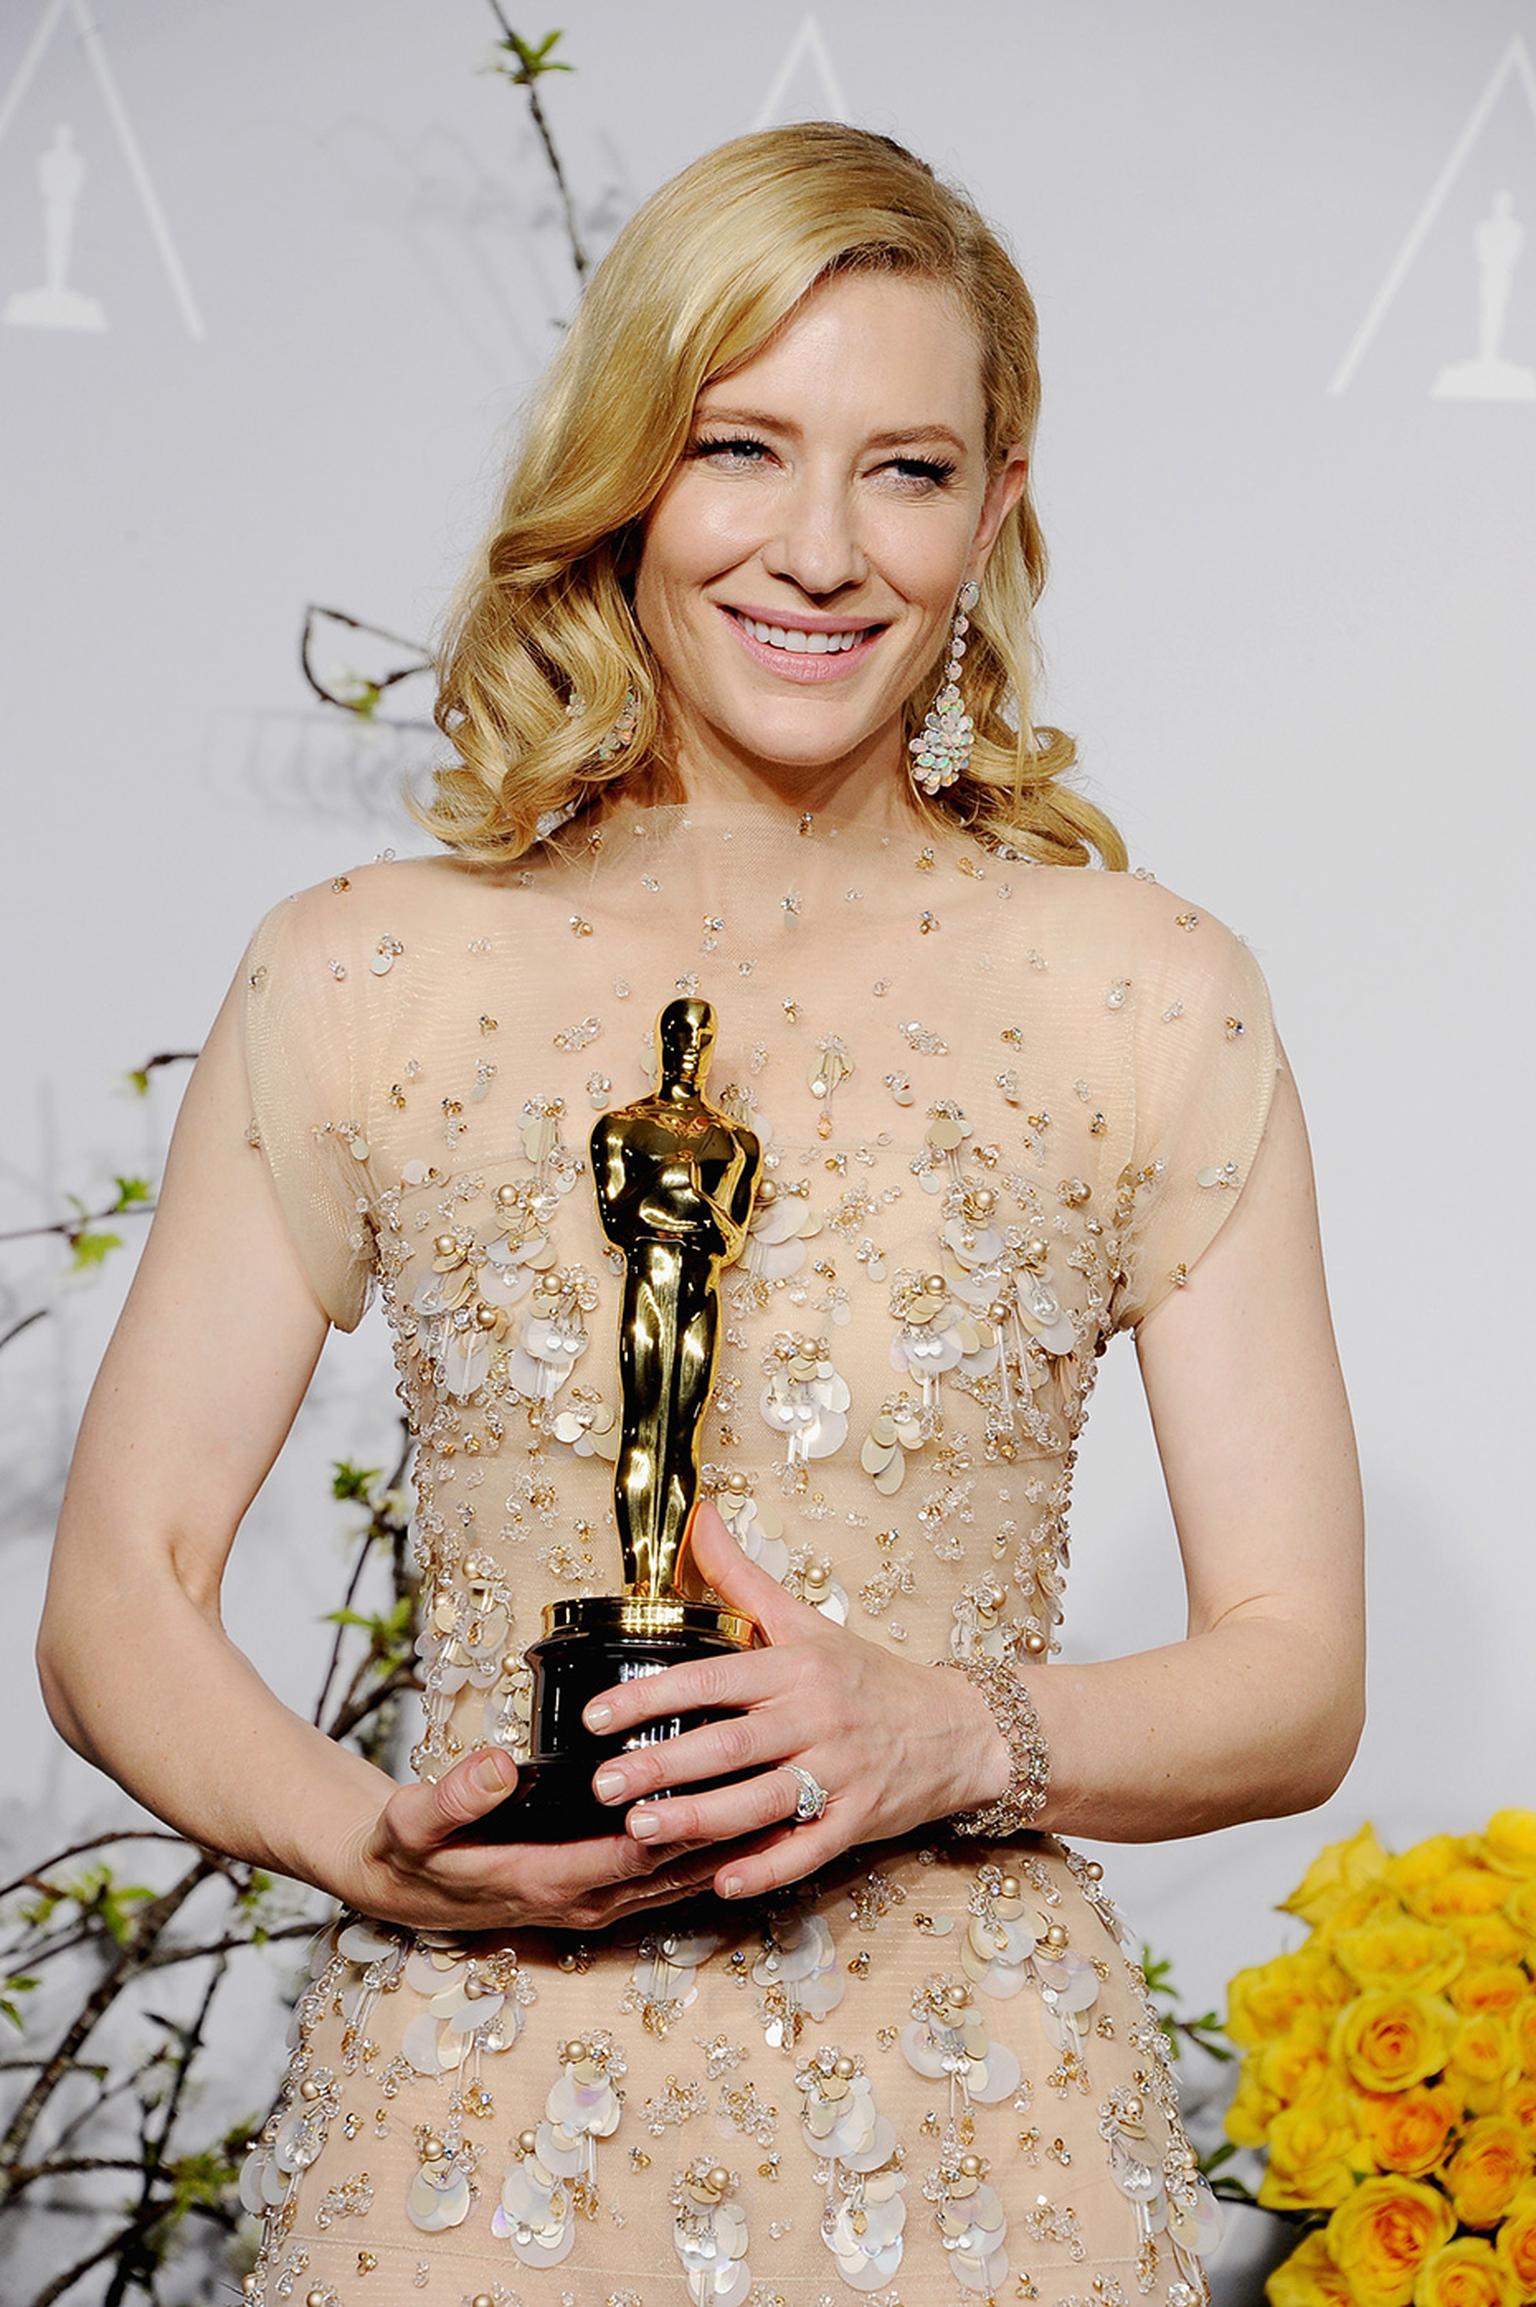 Wearing one-of-a-kind opal earrings from Chopard's 2014 Red Carpet Collection, Cate Blanchett is all smiles after receiving her Academy Award for Best Actress in a Leading Role